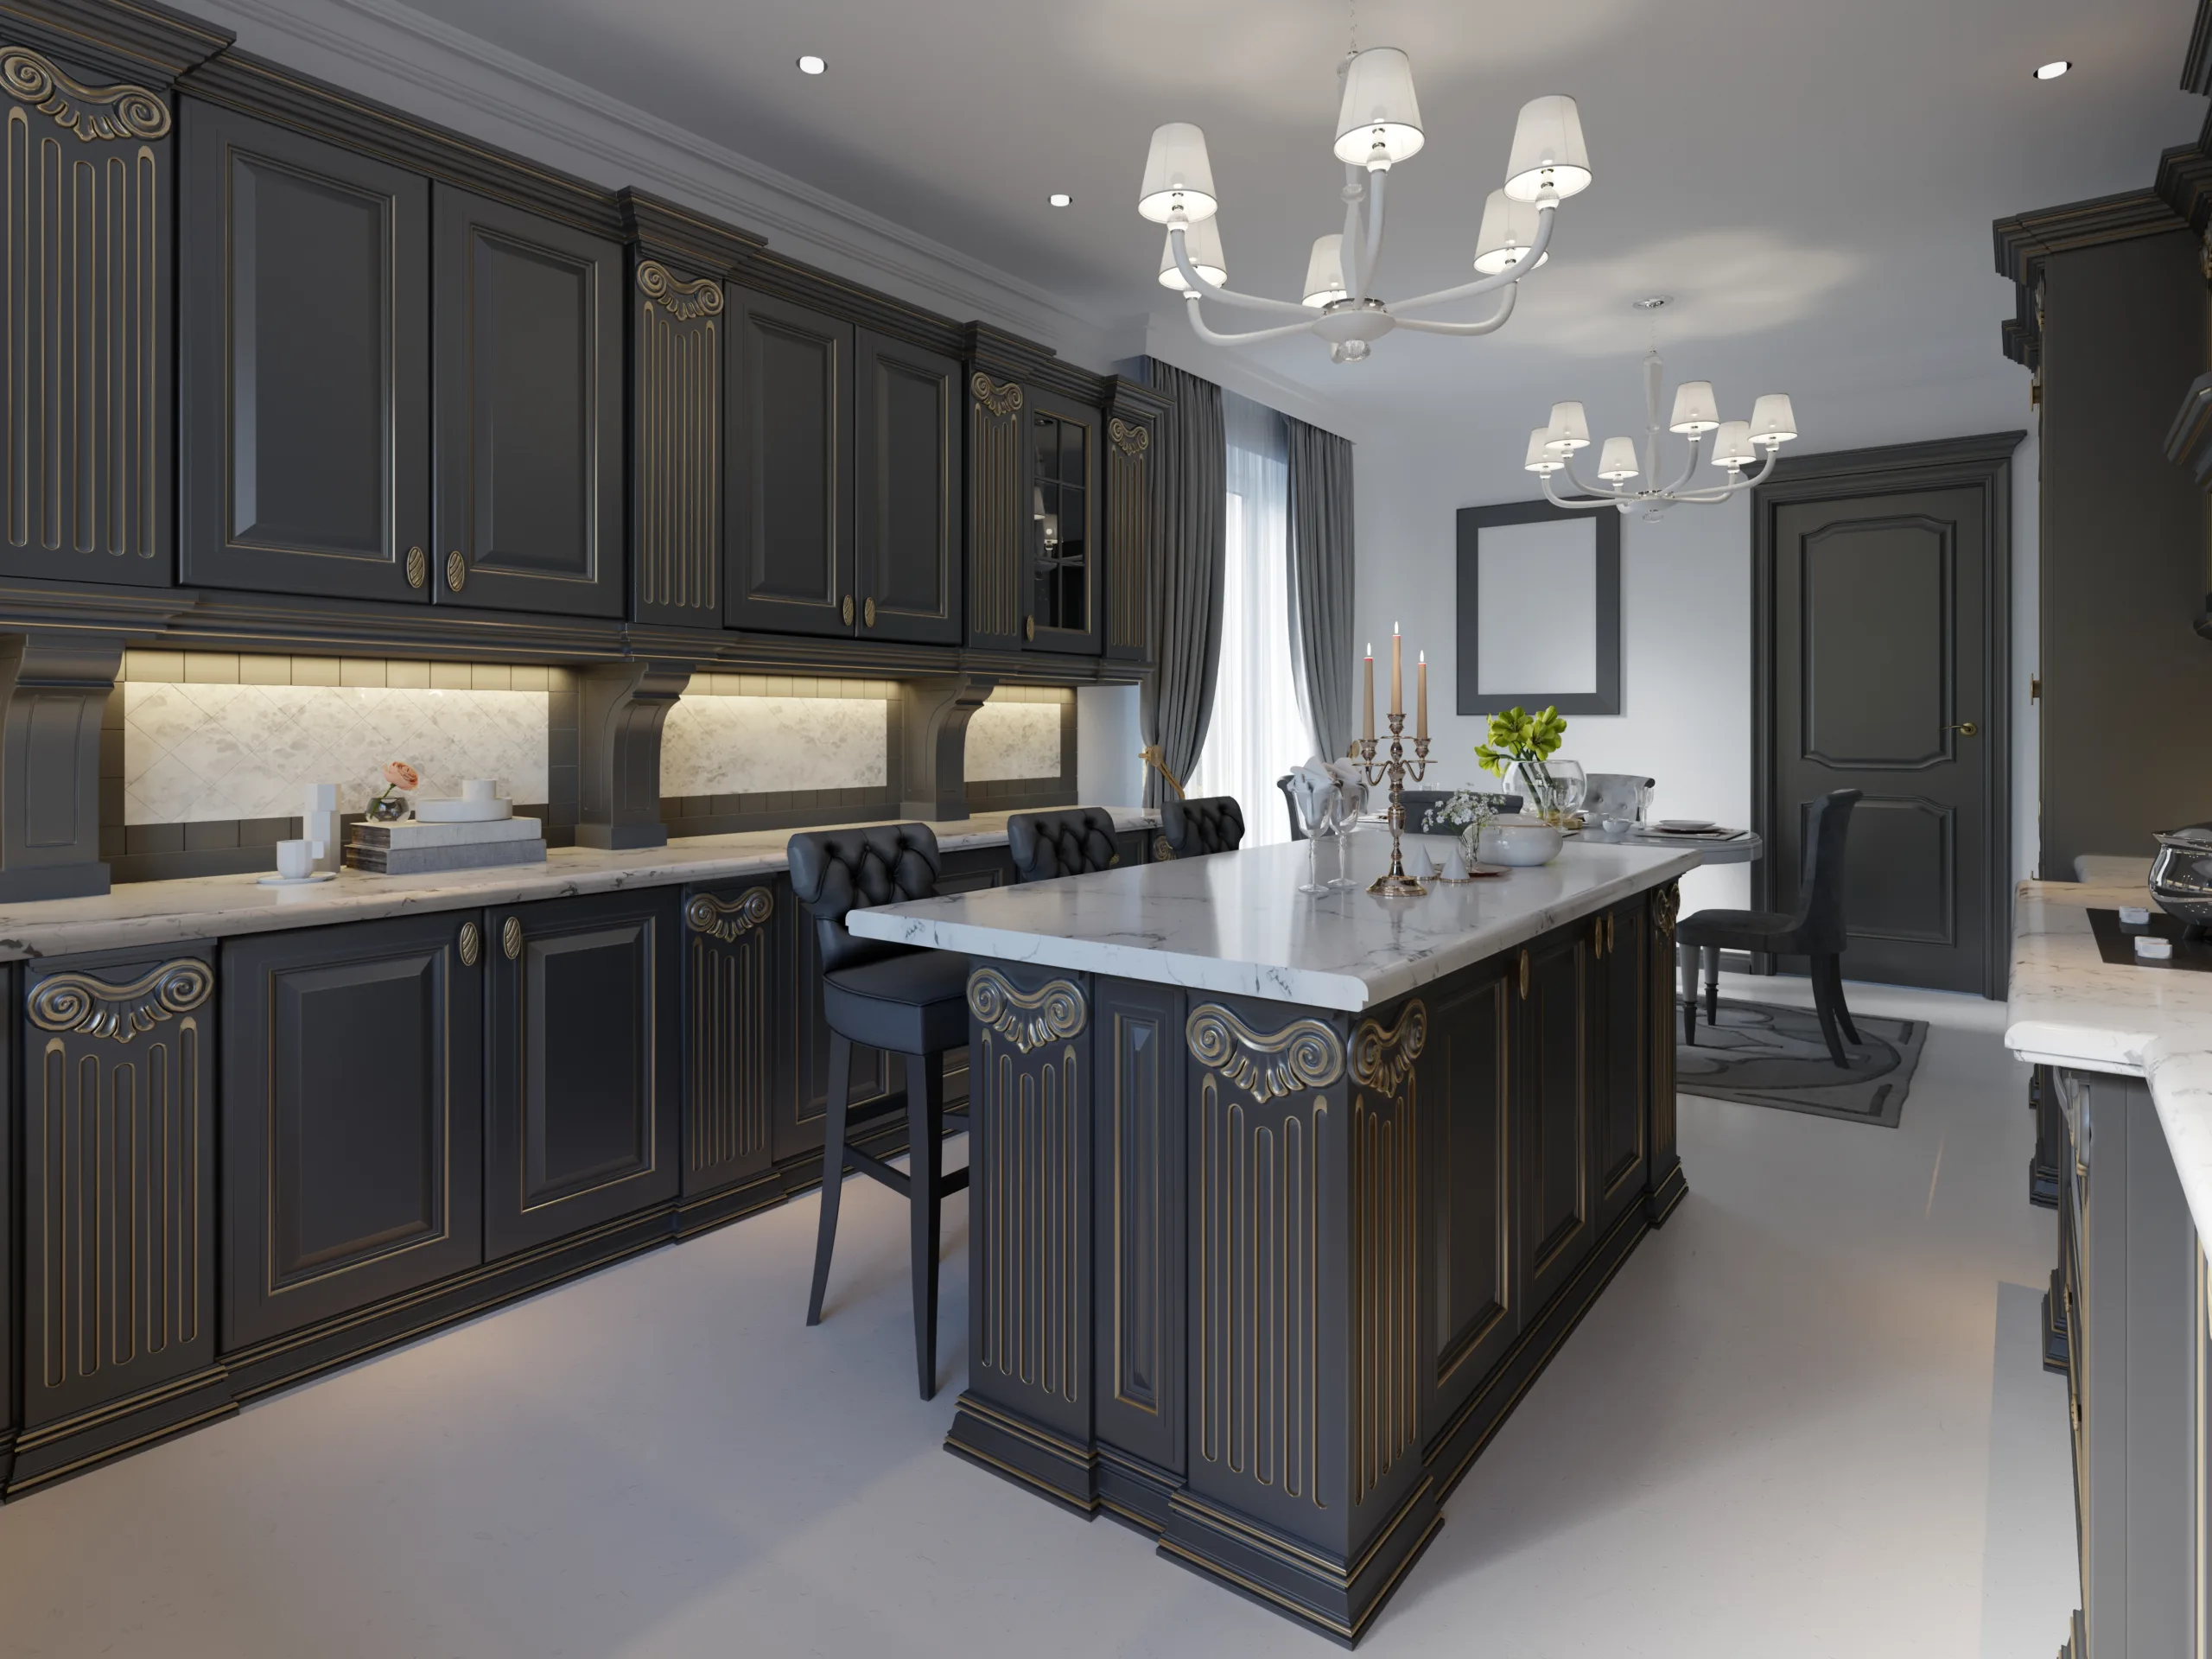 https://ootwc.com/wp-content/uploads/2023/01/Black-Kitchen-Cabinets-1-scaled.webp